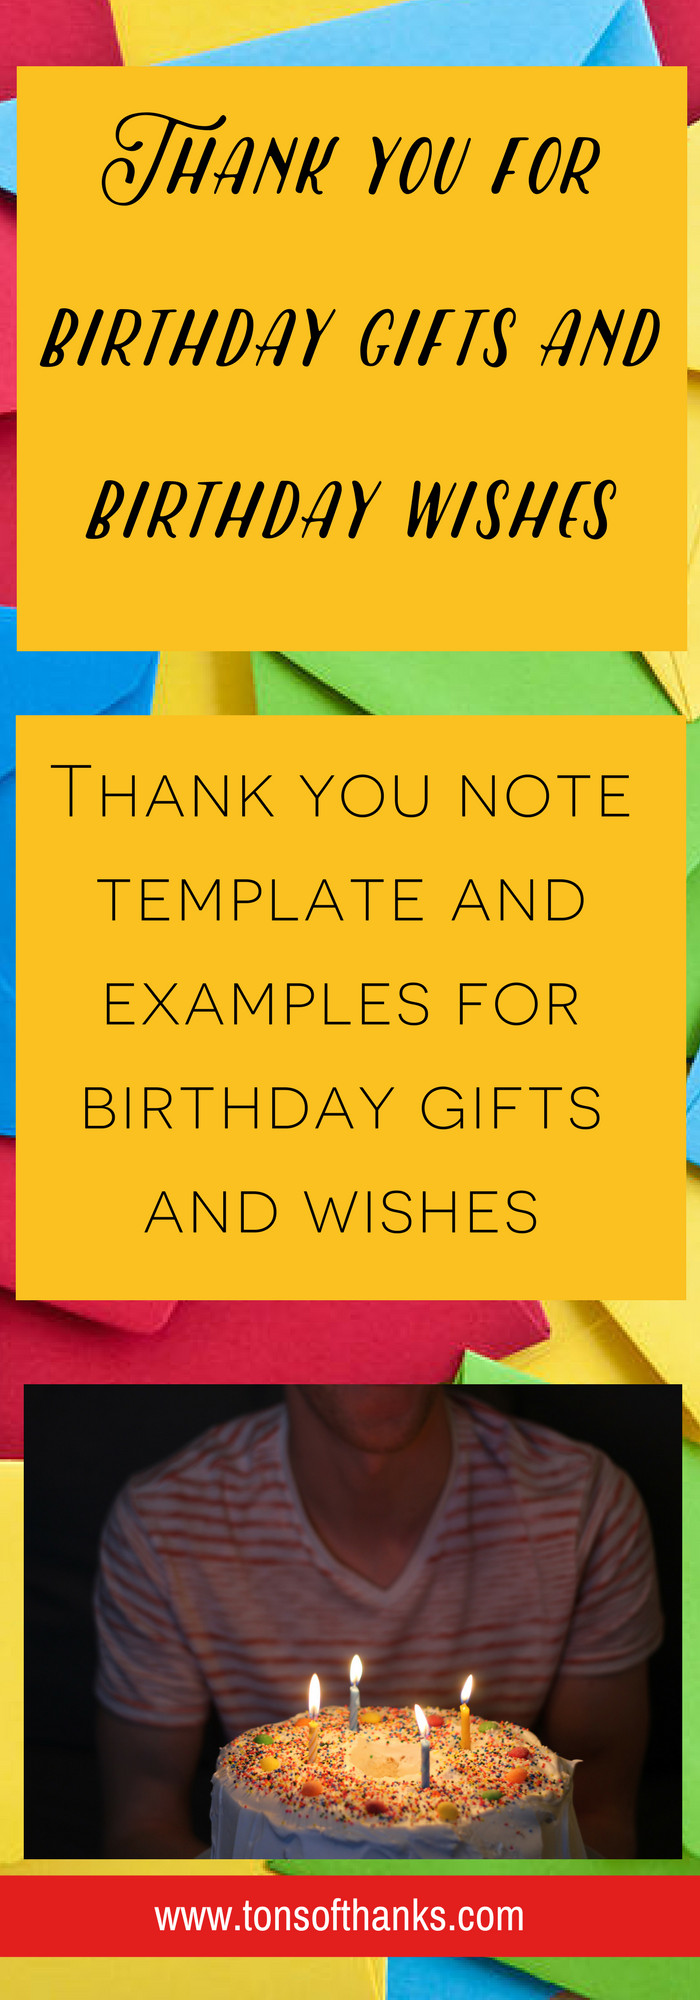 Thank You Notes For Birthday Gifts
 27 Thank you for birthday ts and wishes examples